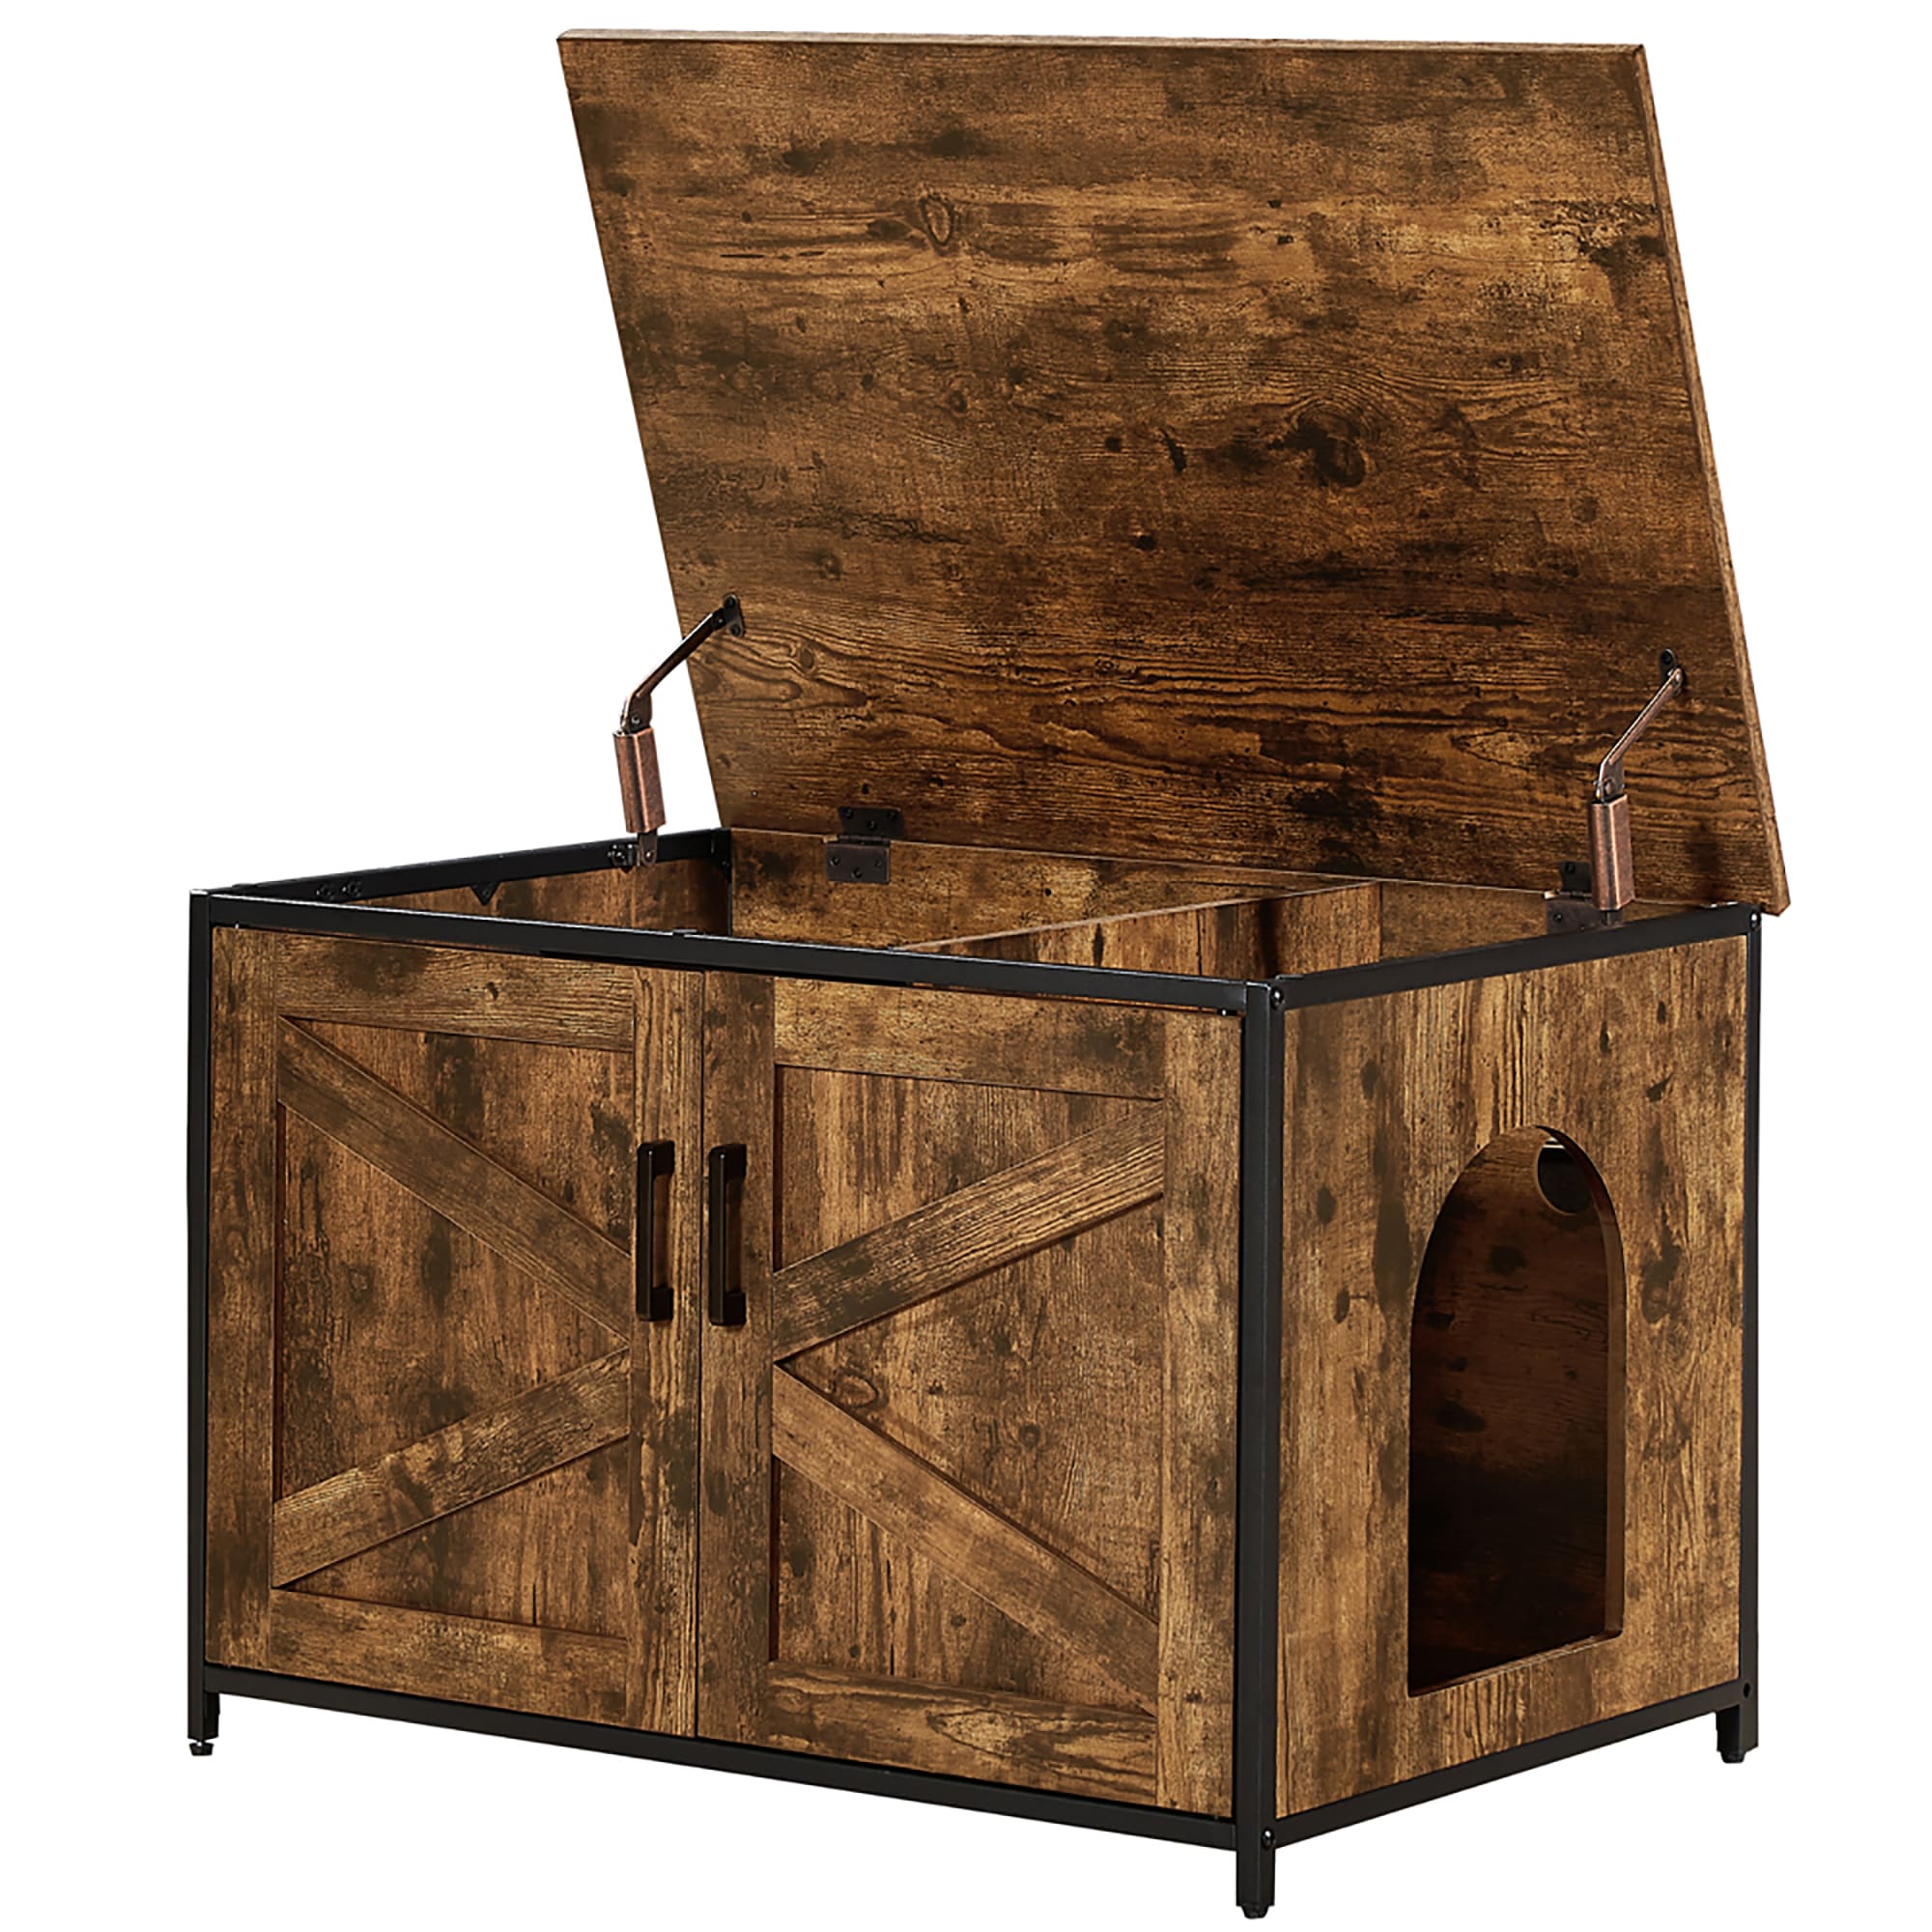 UniPaws Cat Litter Box Enclosure with Top Opening in Rustic, 30" L X 21" W X 21" H, 47 LBS